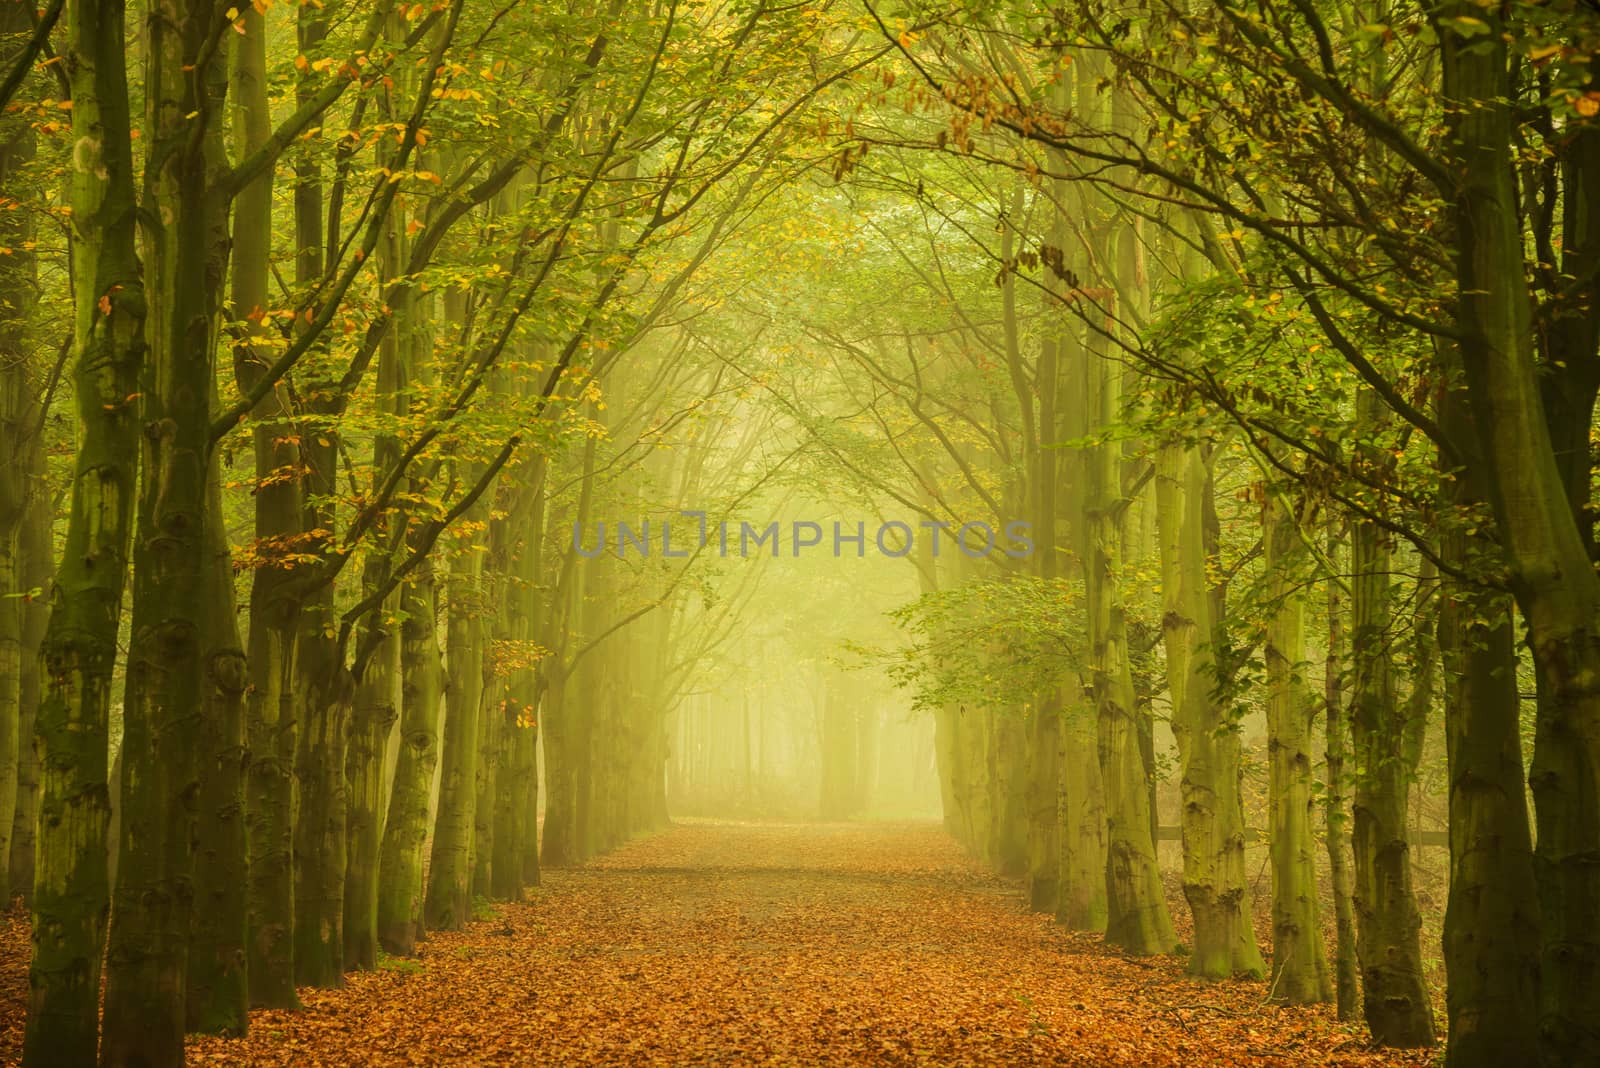 Green beech trees along a forest path in the fog creating a tunnel towards the light.